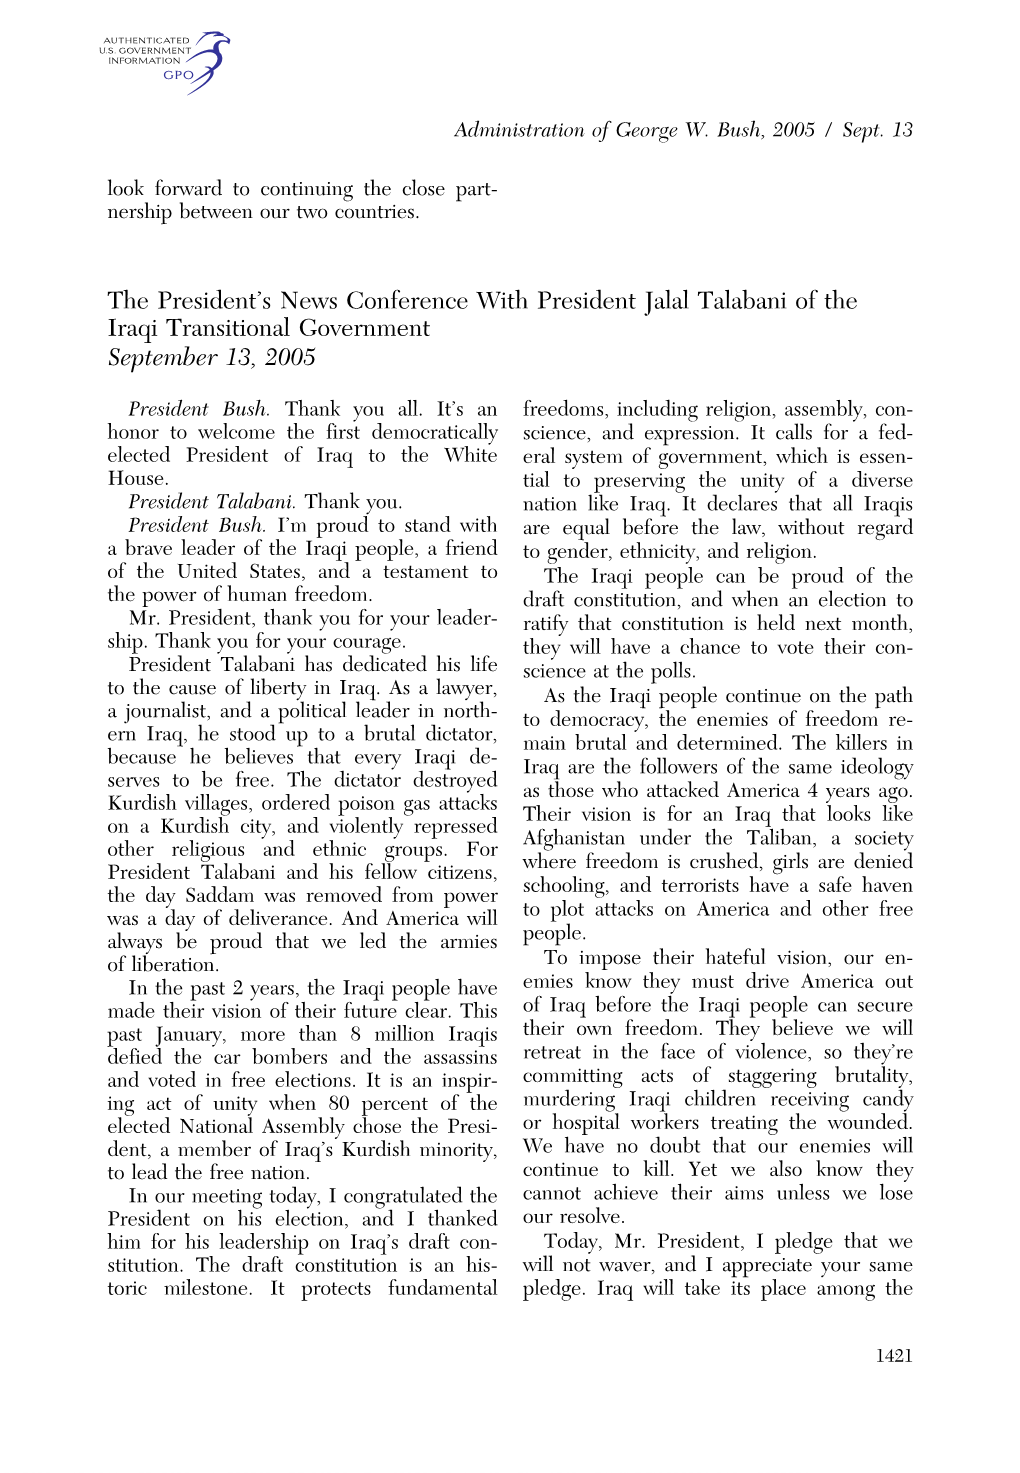 The President's News Conference with President Jalal